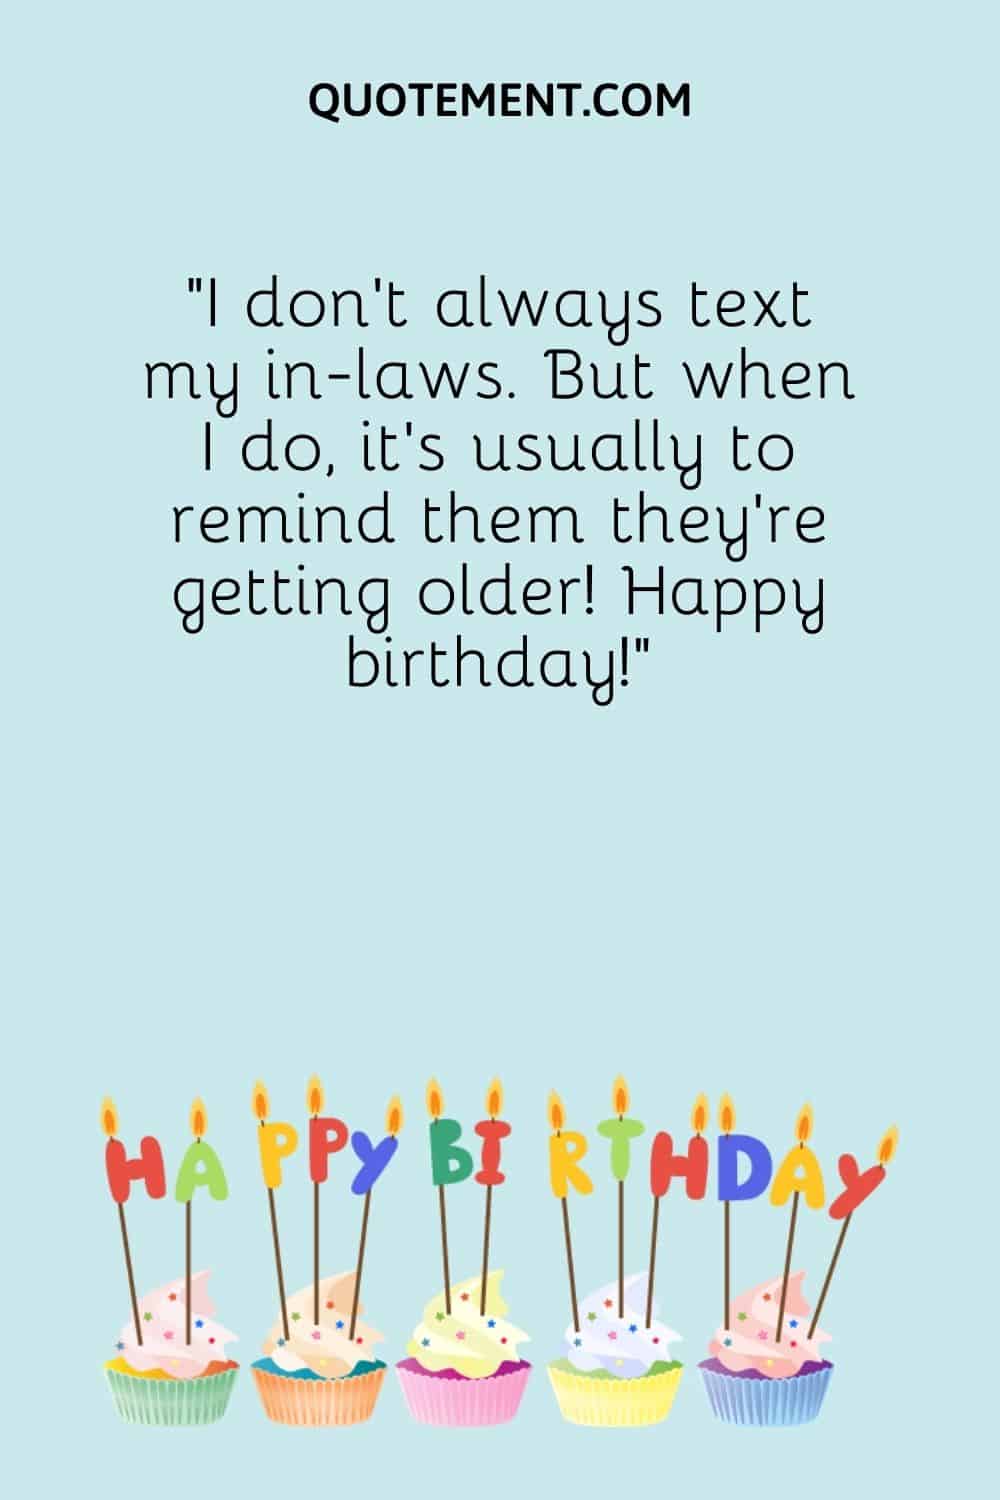 I don’t always text my in-laws. But when I do, it’s usually to remind them they’re getting older!